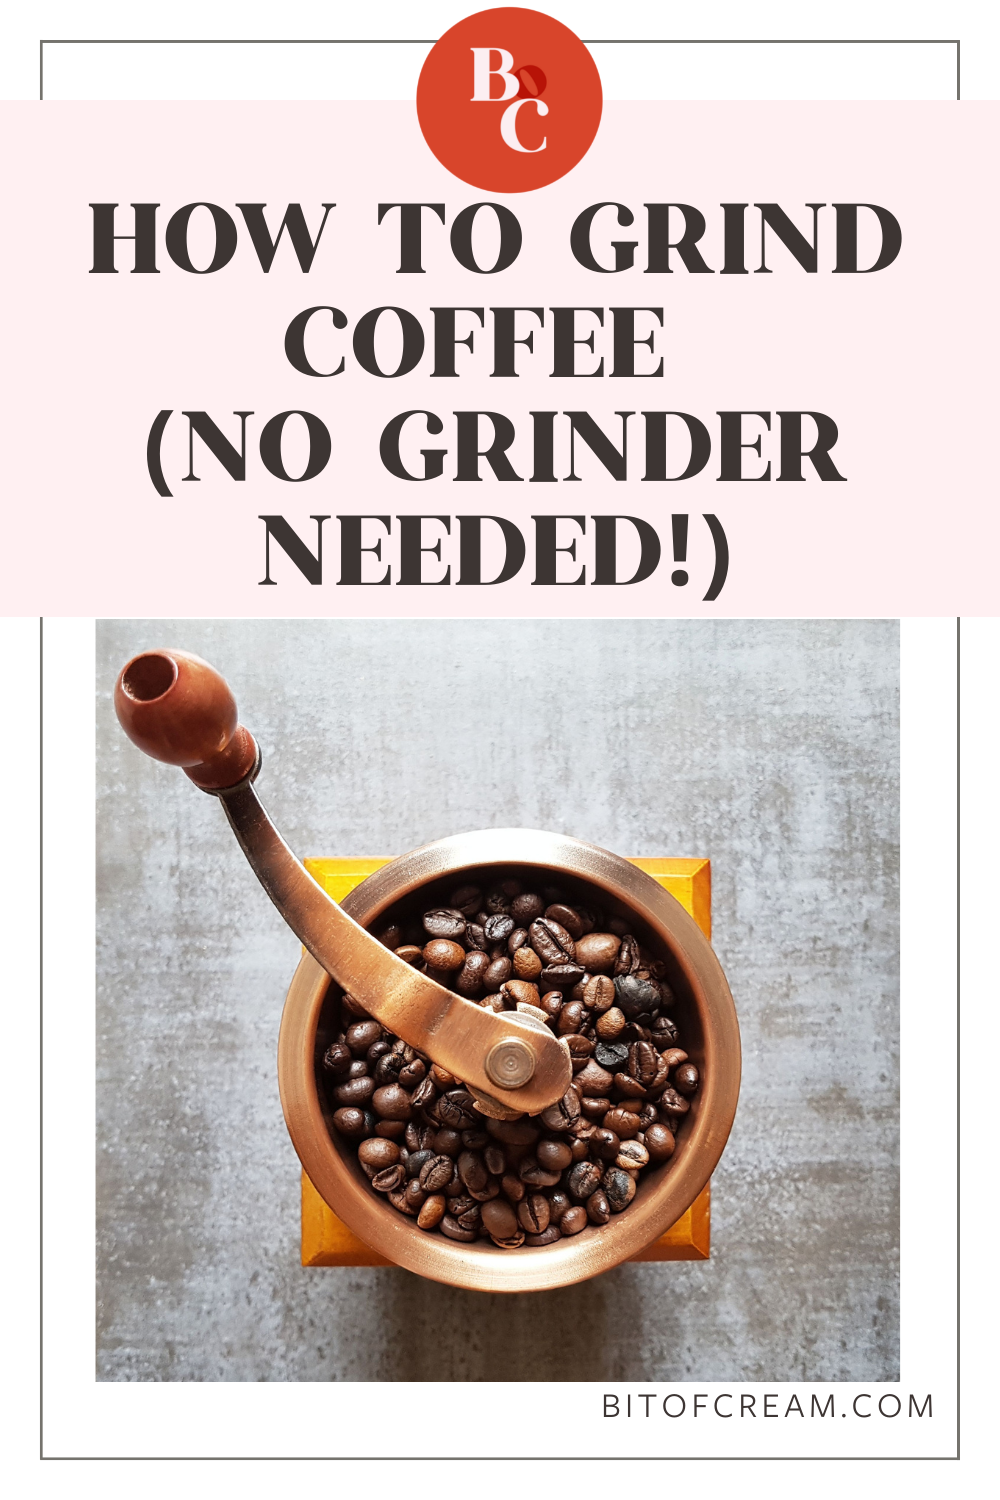 How To Grind Coffee (Even If You Don't Have a Grinder!)